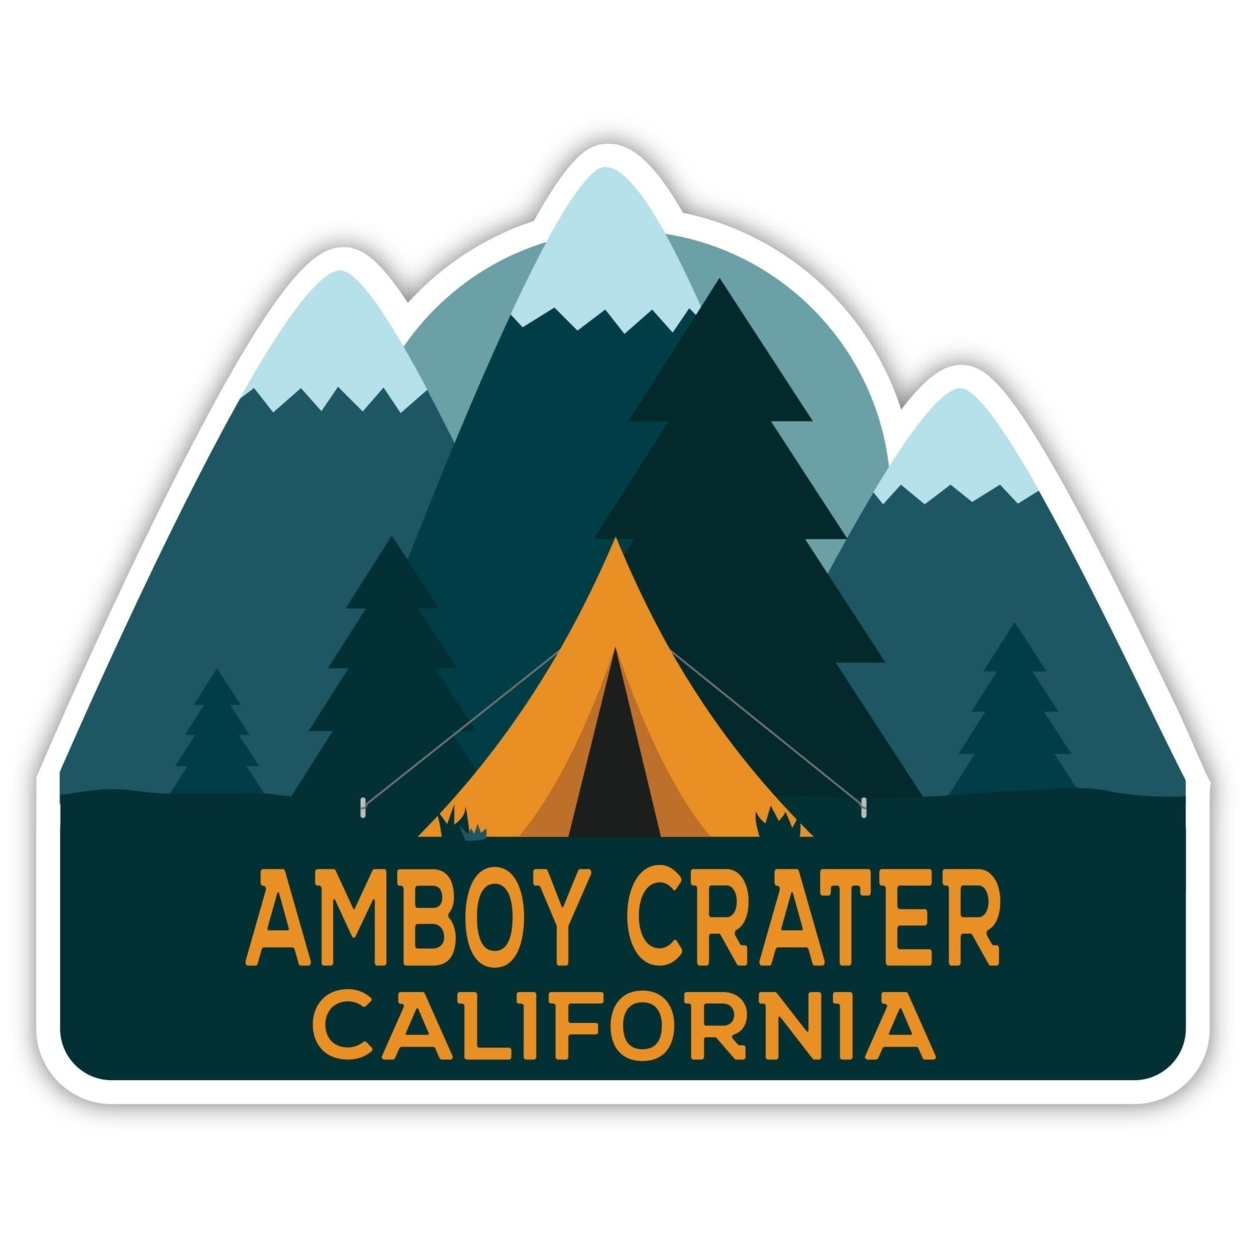 Amboy Crater California Souvenir Decorative Stickers (Choose Theme And Size) - 4-Pack, 2-Inch, Tent